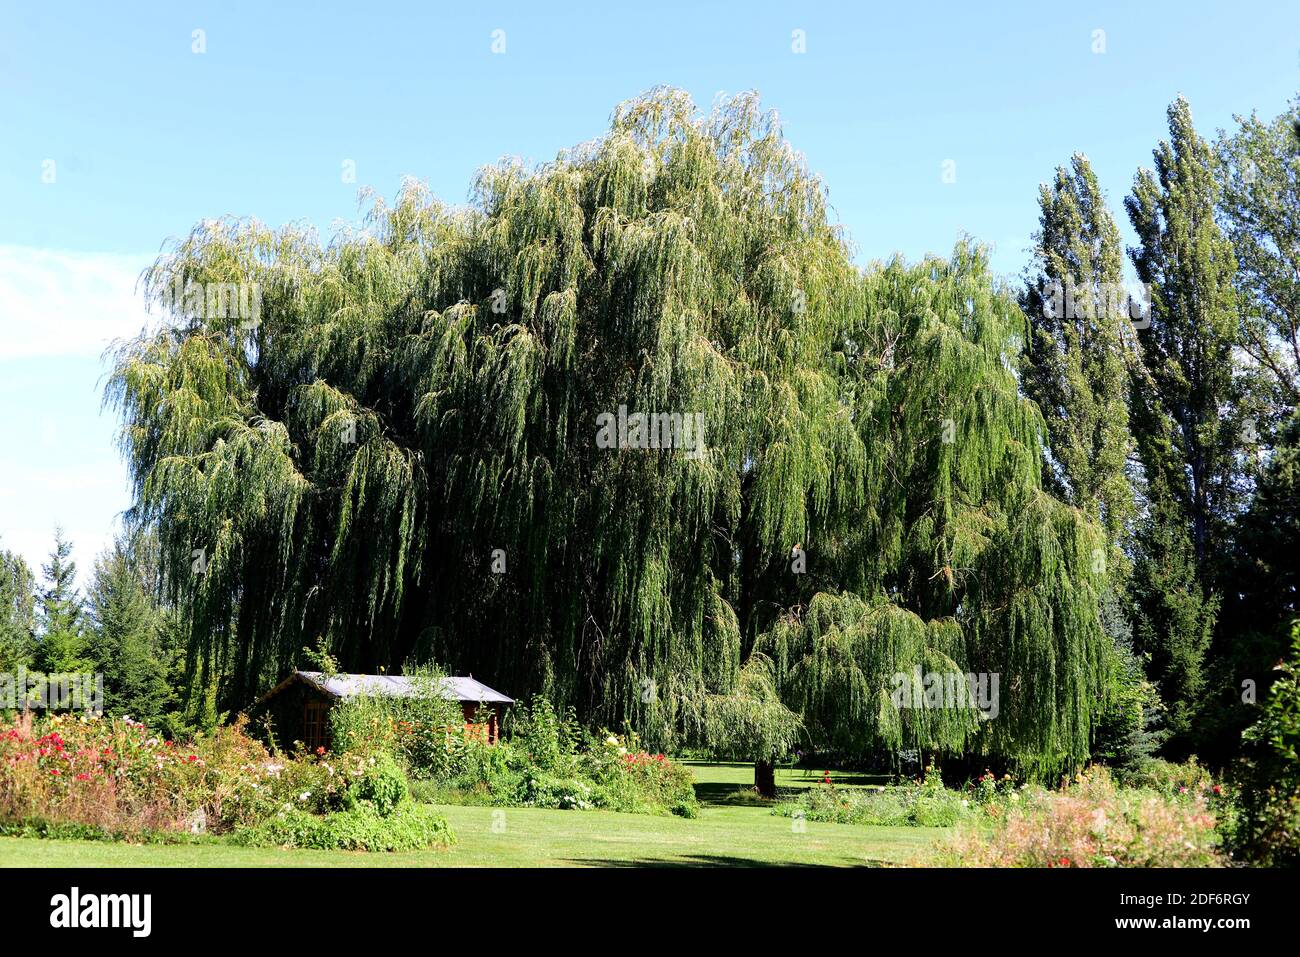 Babylon willow or weeping willow (Salix babylonica) is an ornamental deciduous tre native to China. This photo was taken in Mave, Palencia province, Stock Photo